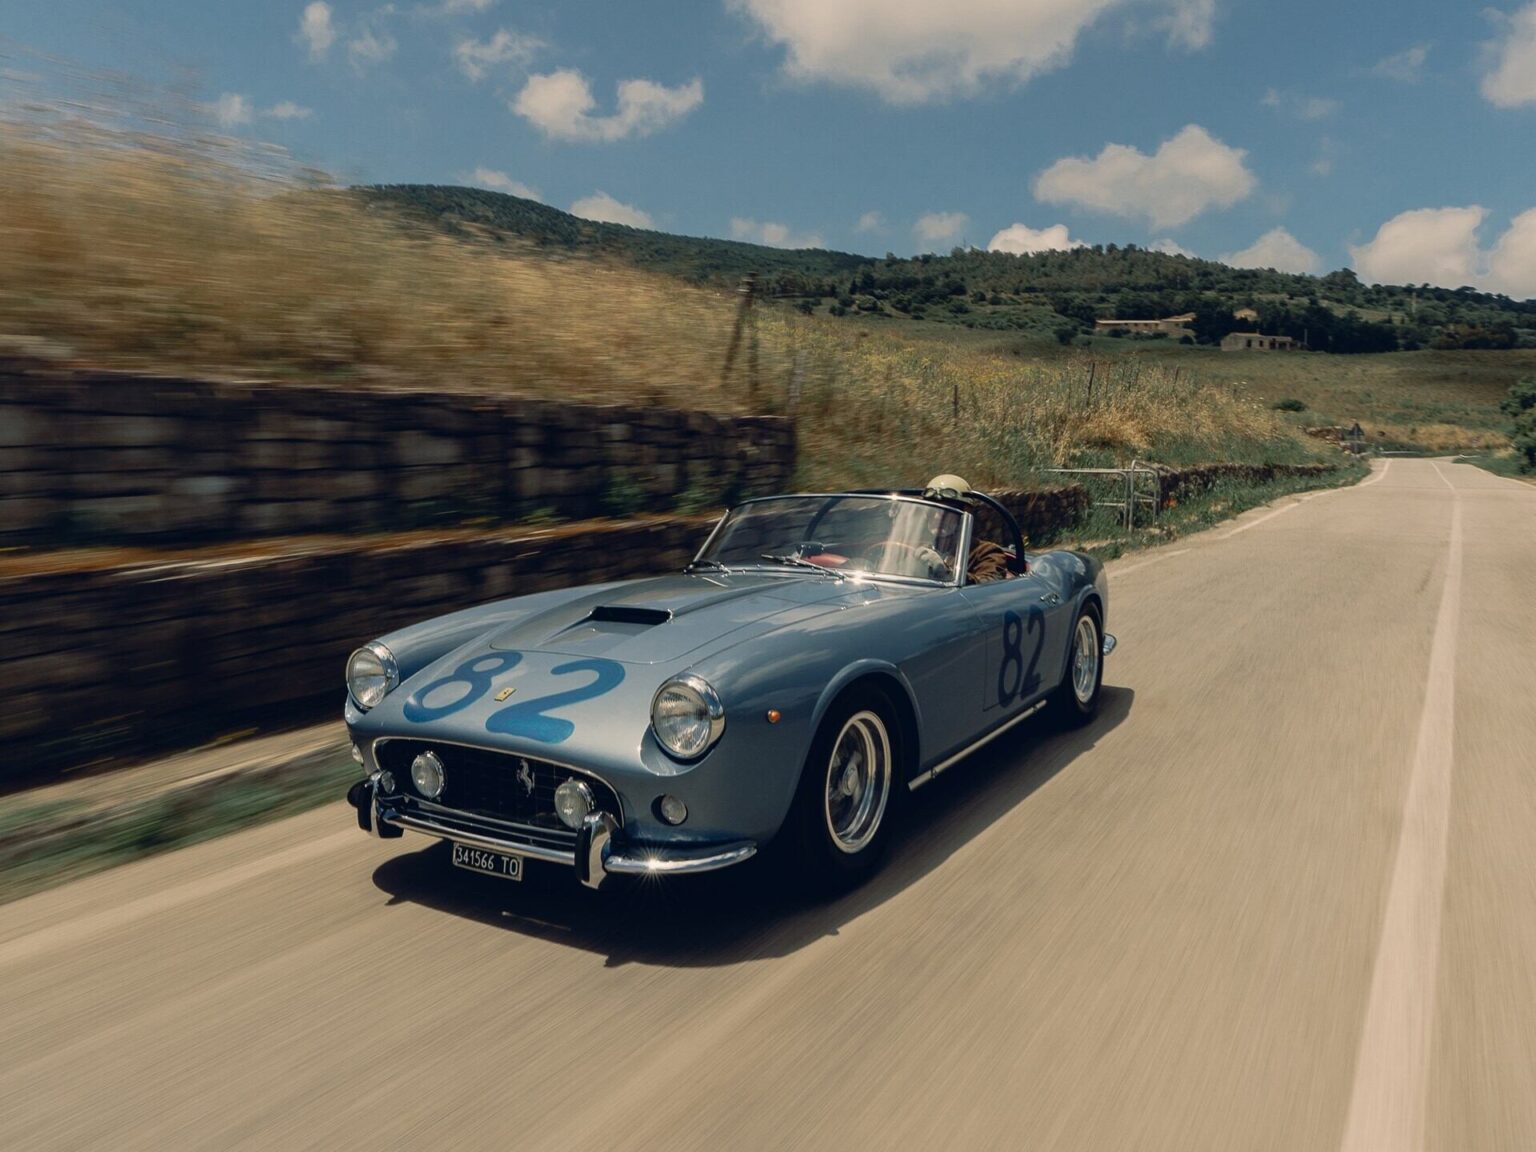 A super rare 1960 Ferrari 250 GT SWB California Spider is set to sell for over £9 million at auction, equivalent to the price of 47 brand new Ferraris. This vintage model is one of only 18 made and has a rich racing history.